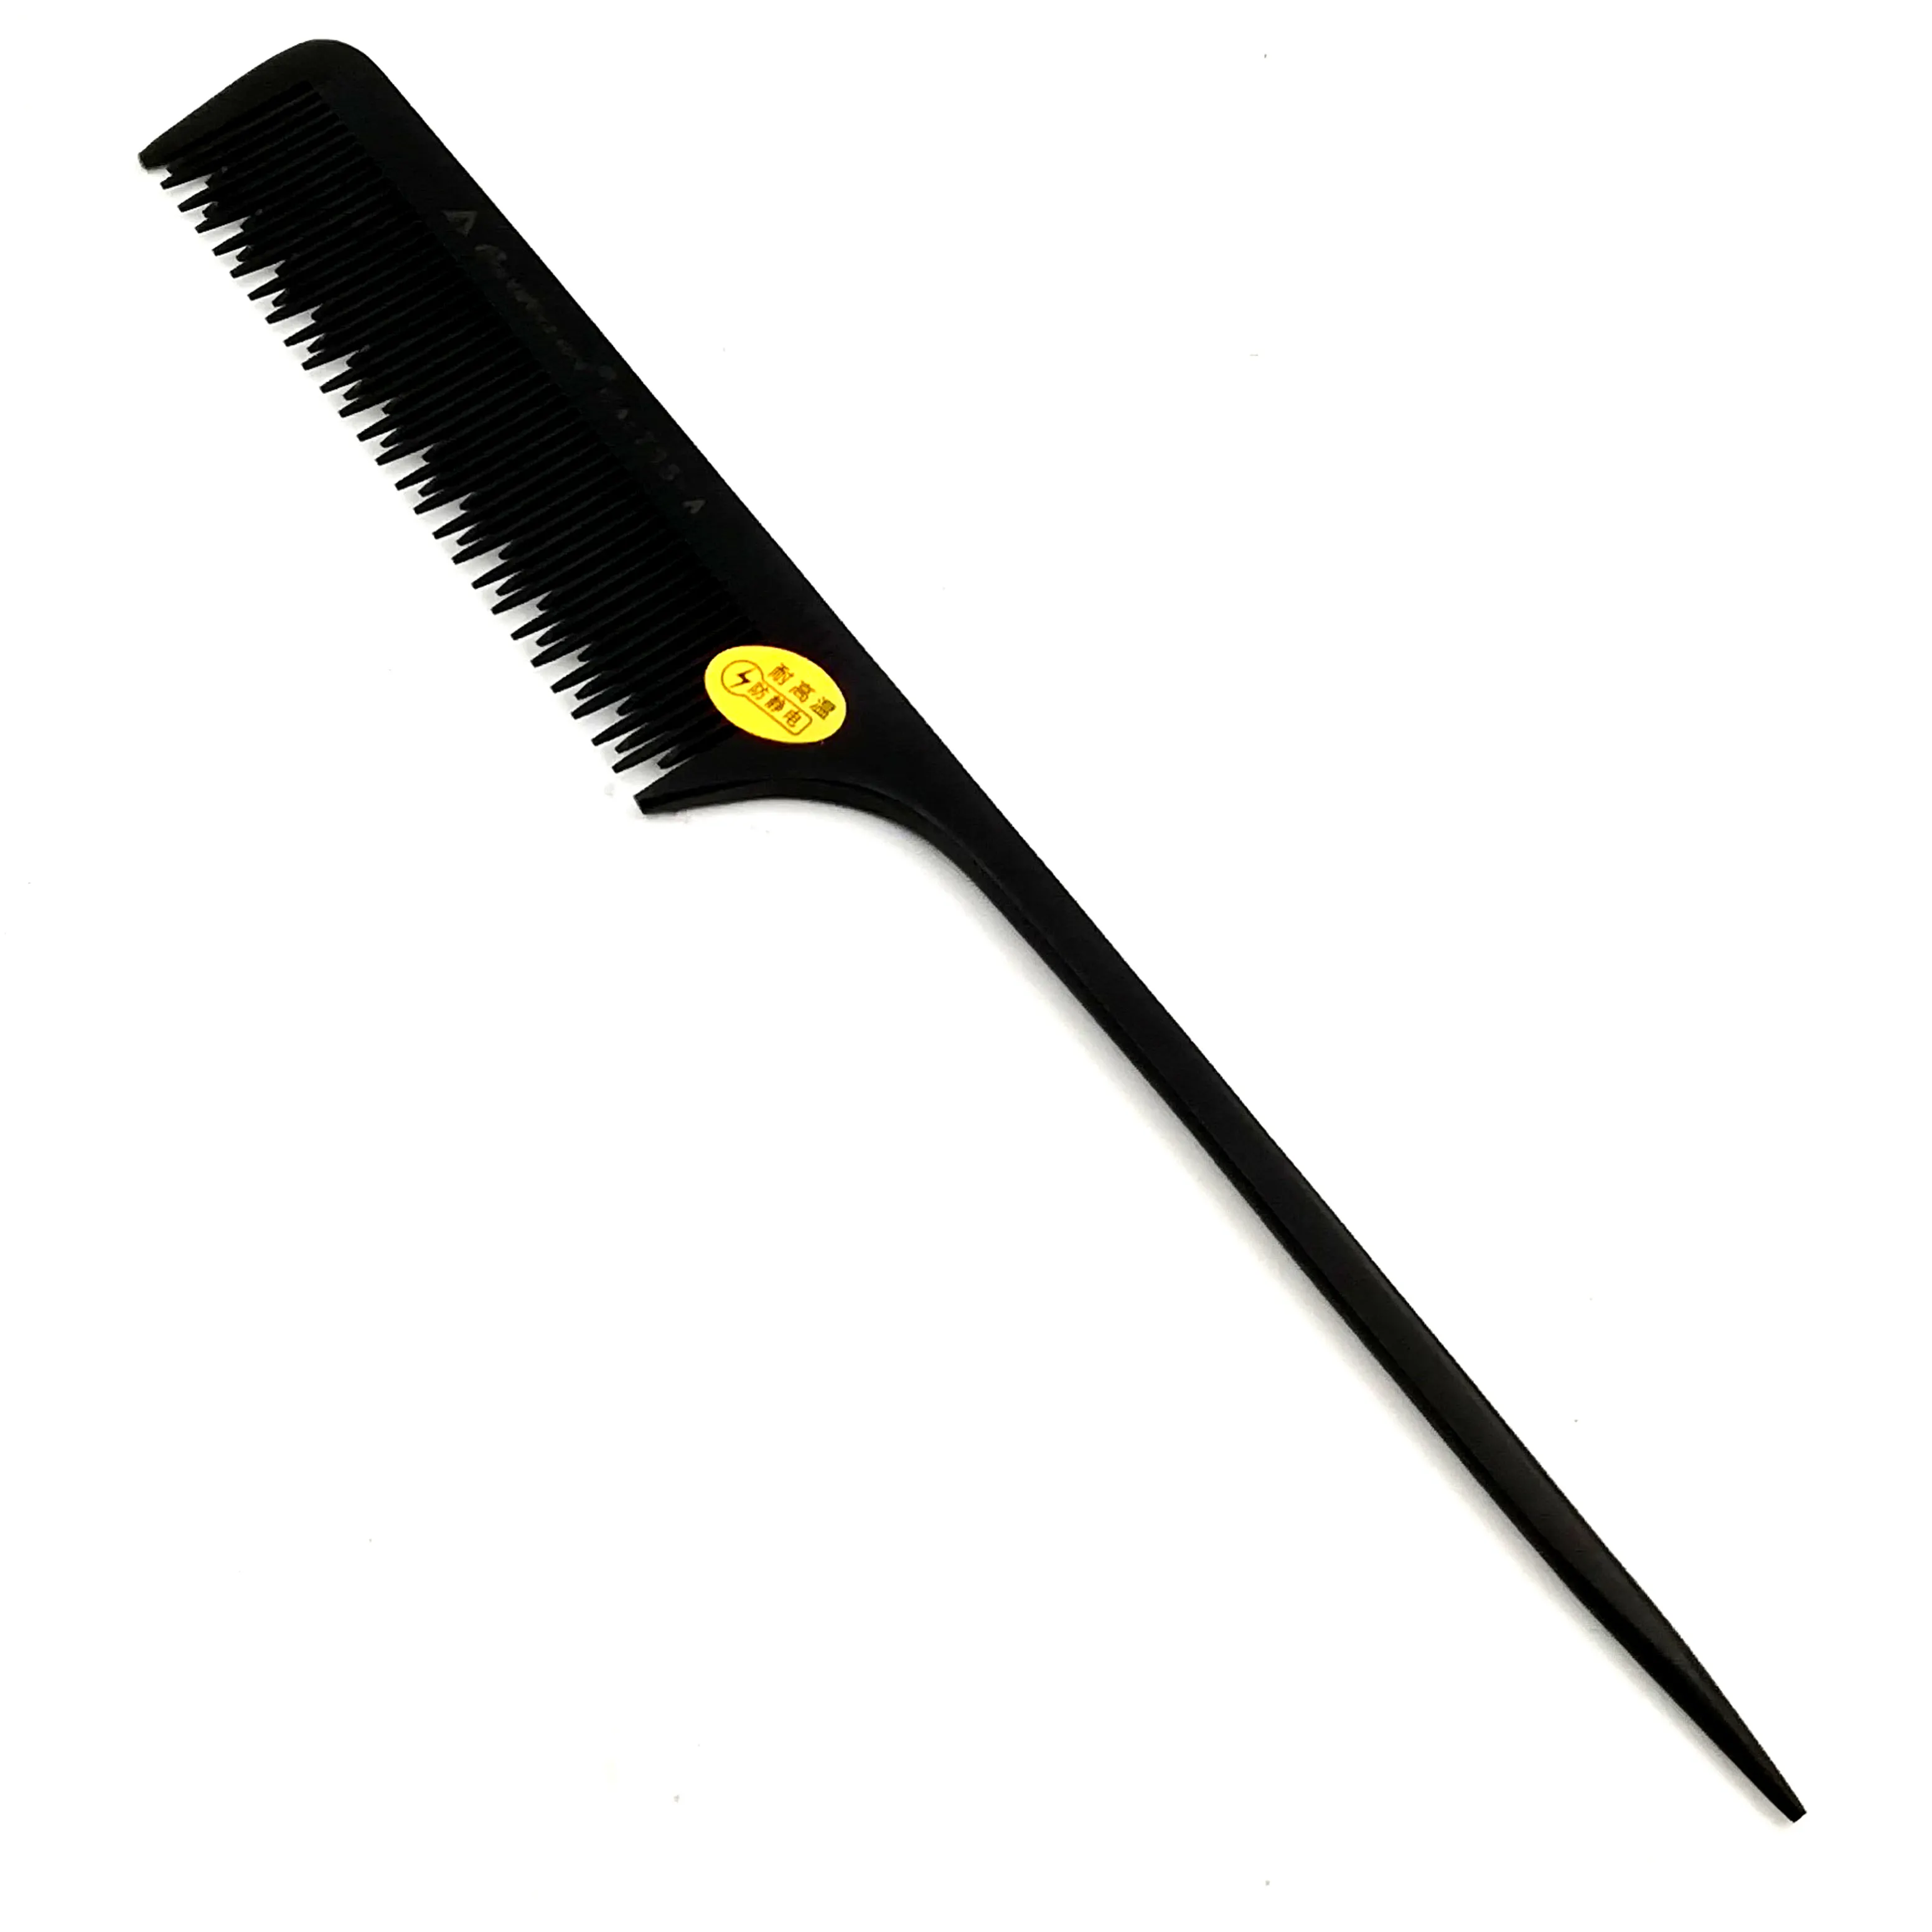 creative products 2020 Wholesale Plastic Hair Comb Barber Styling Hair Cutting Comb